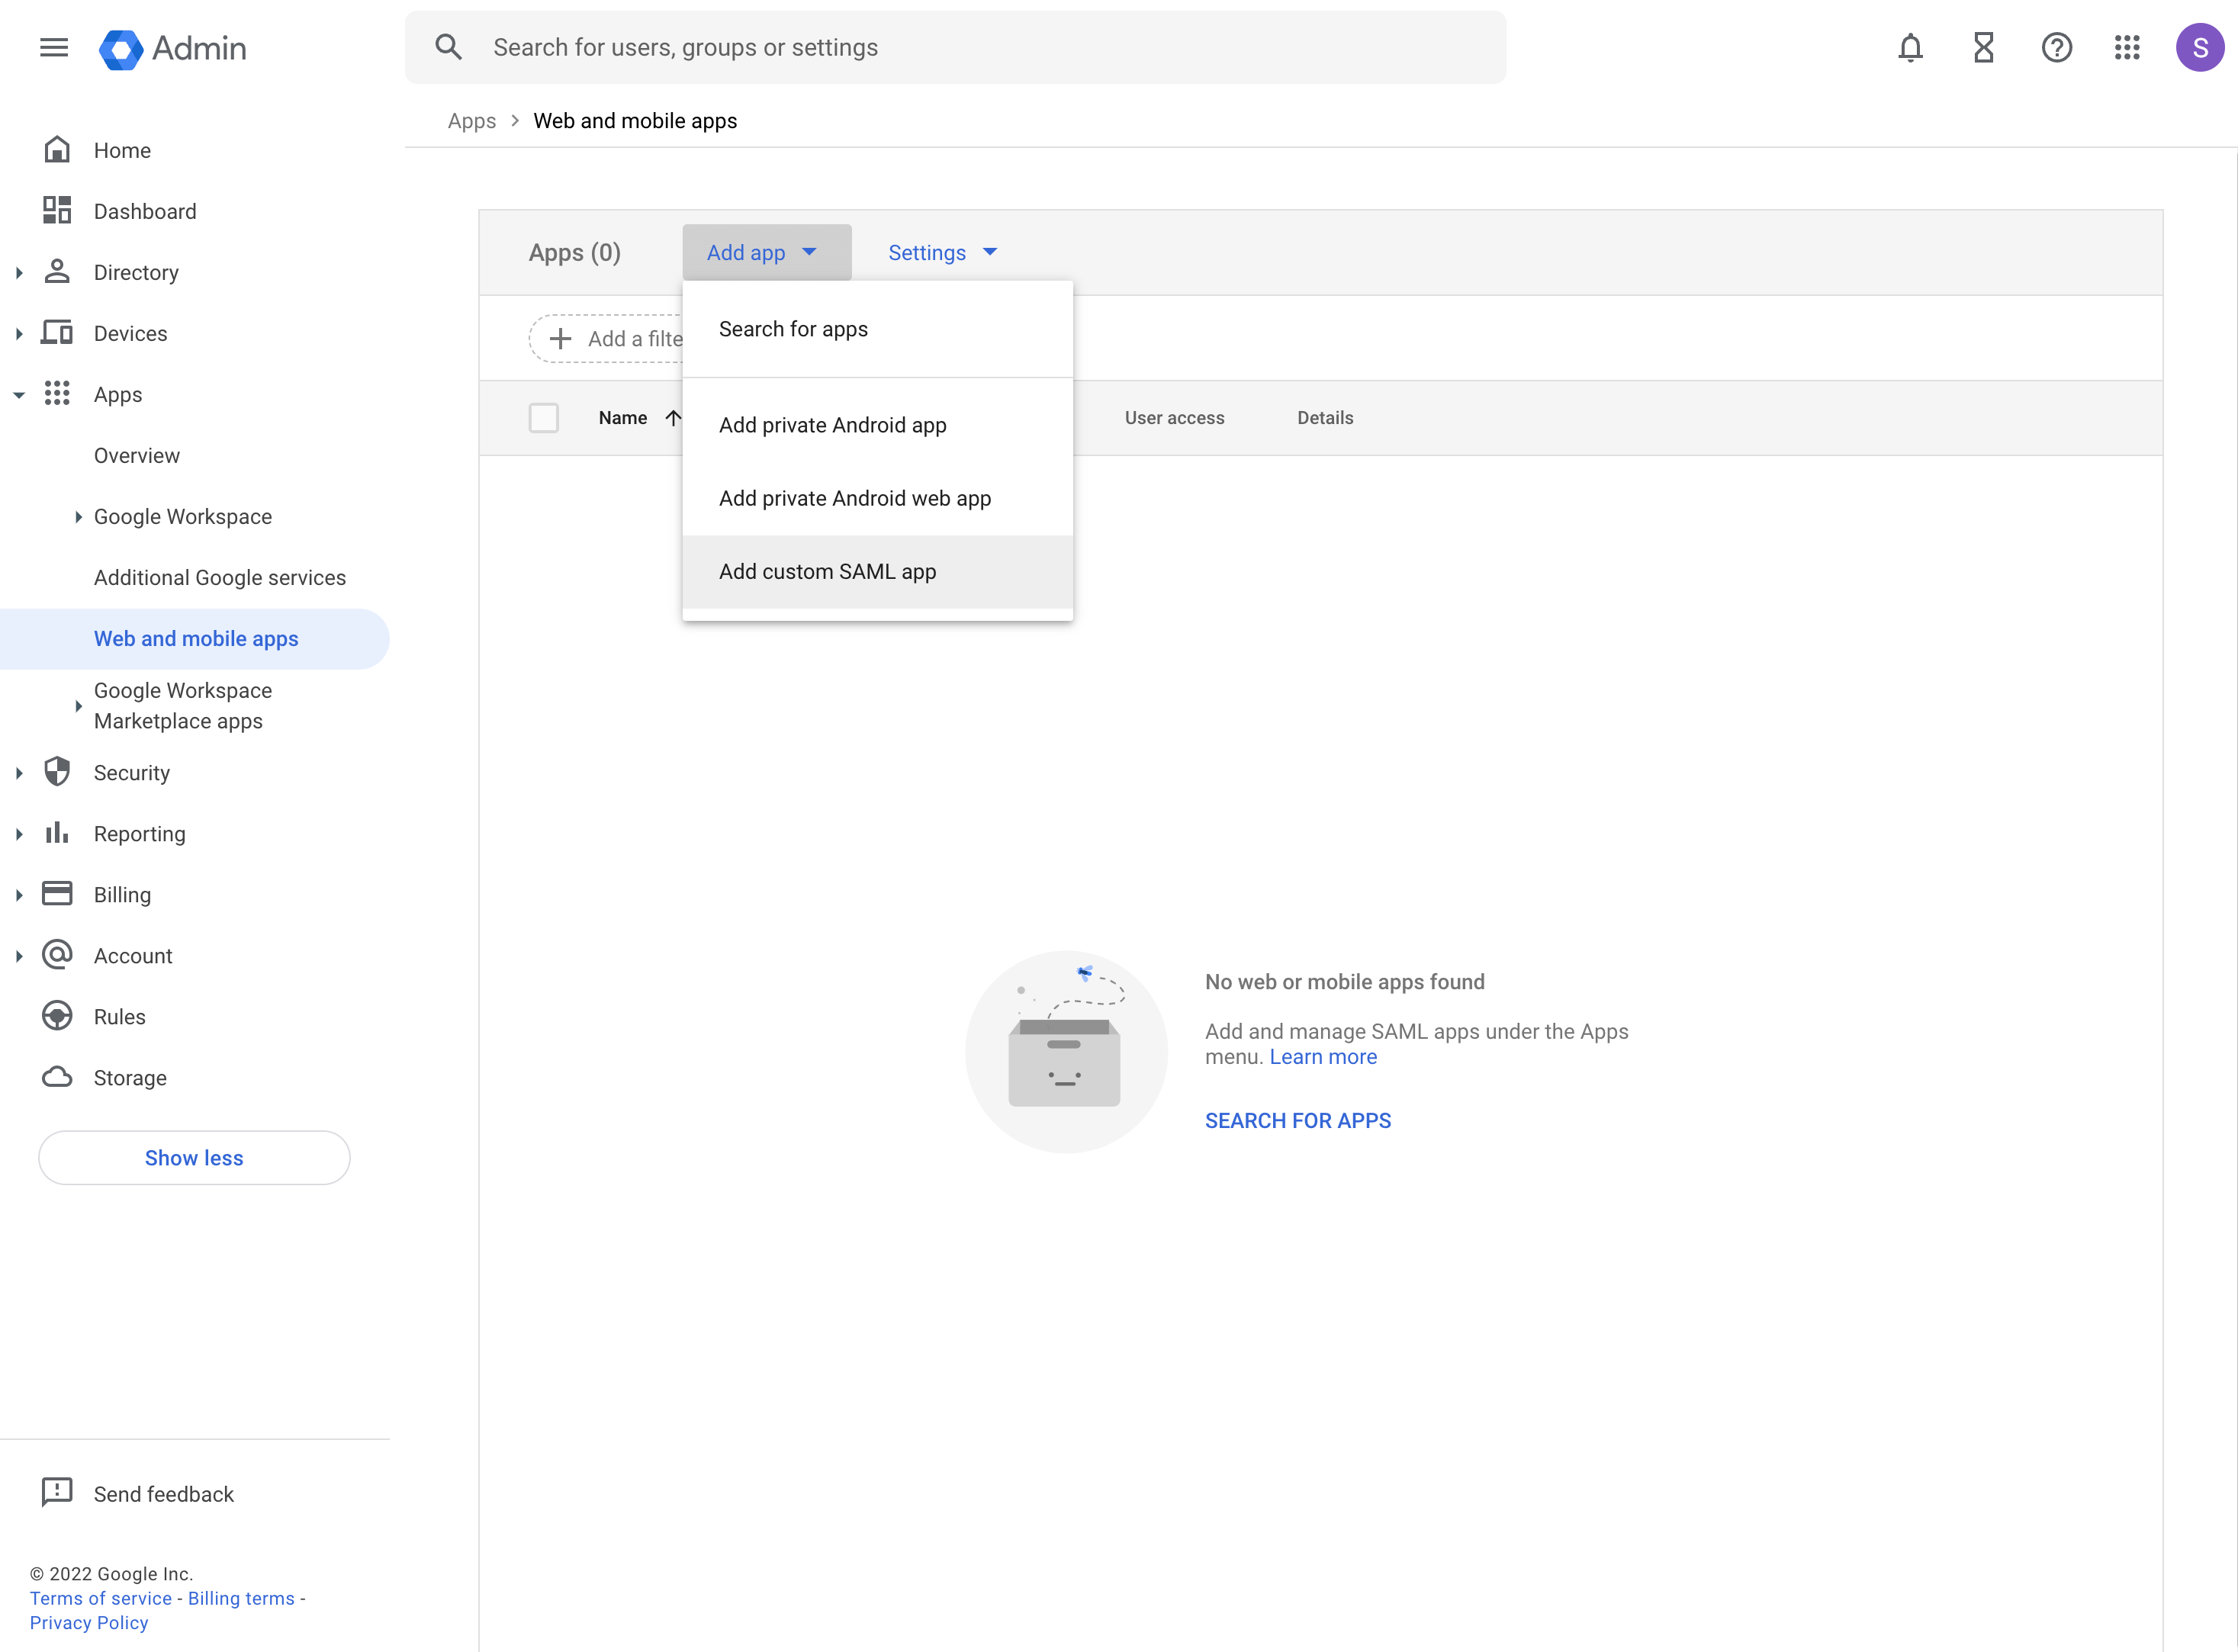 Google Workspace: Web and mobile apps admin console, Add custom SAML app selected